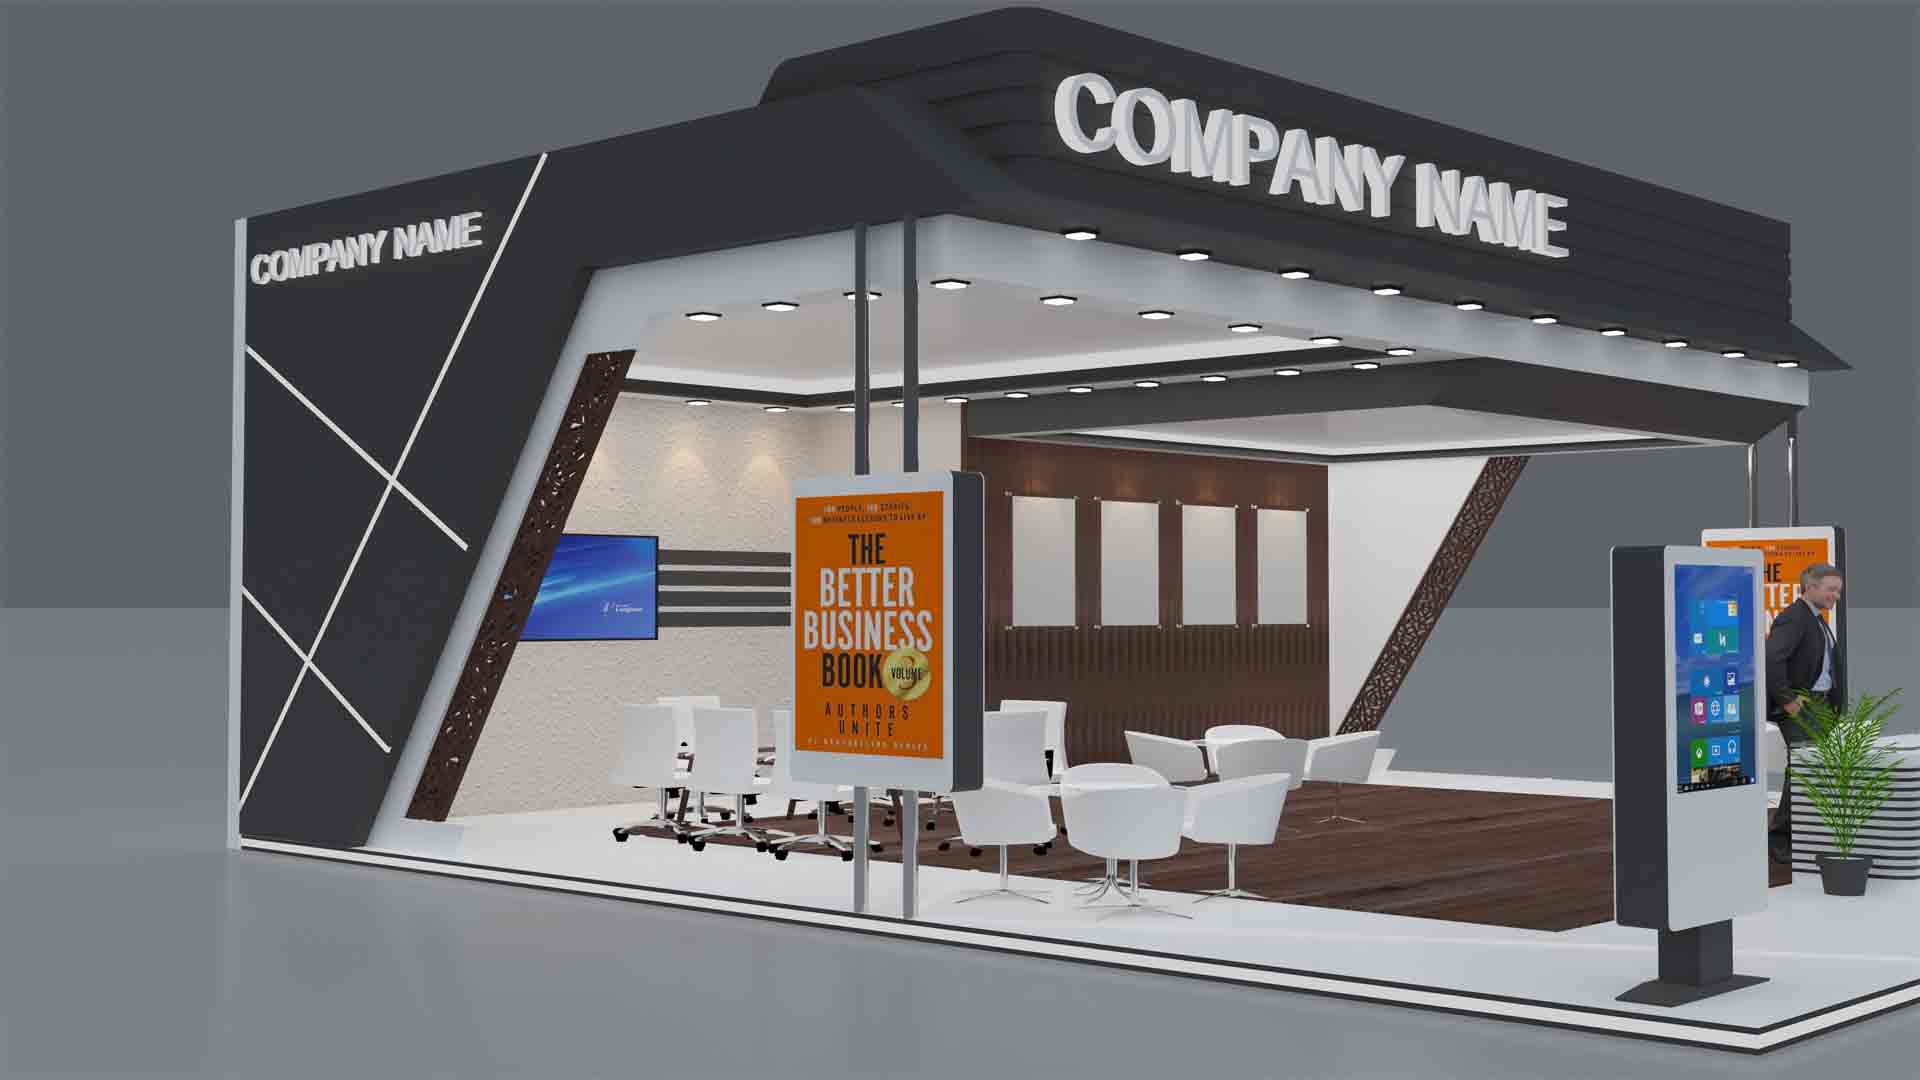 How to Find Exhibition Booth Design Company In Dubai